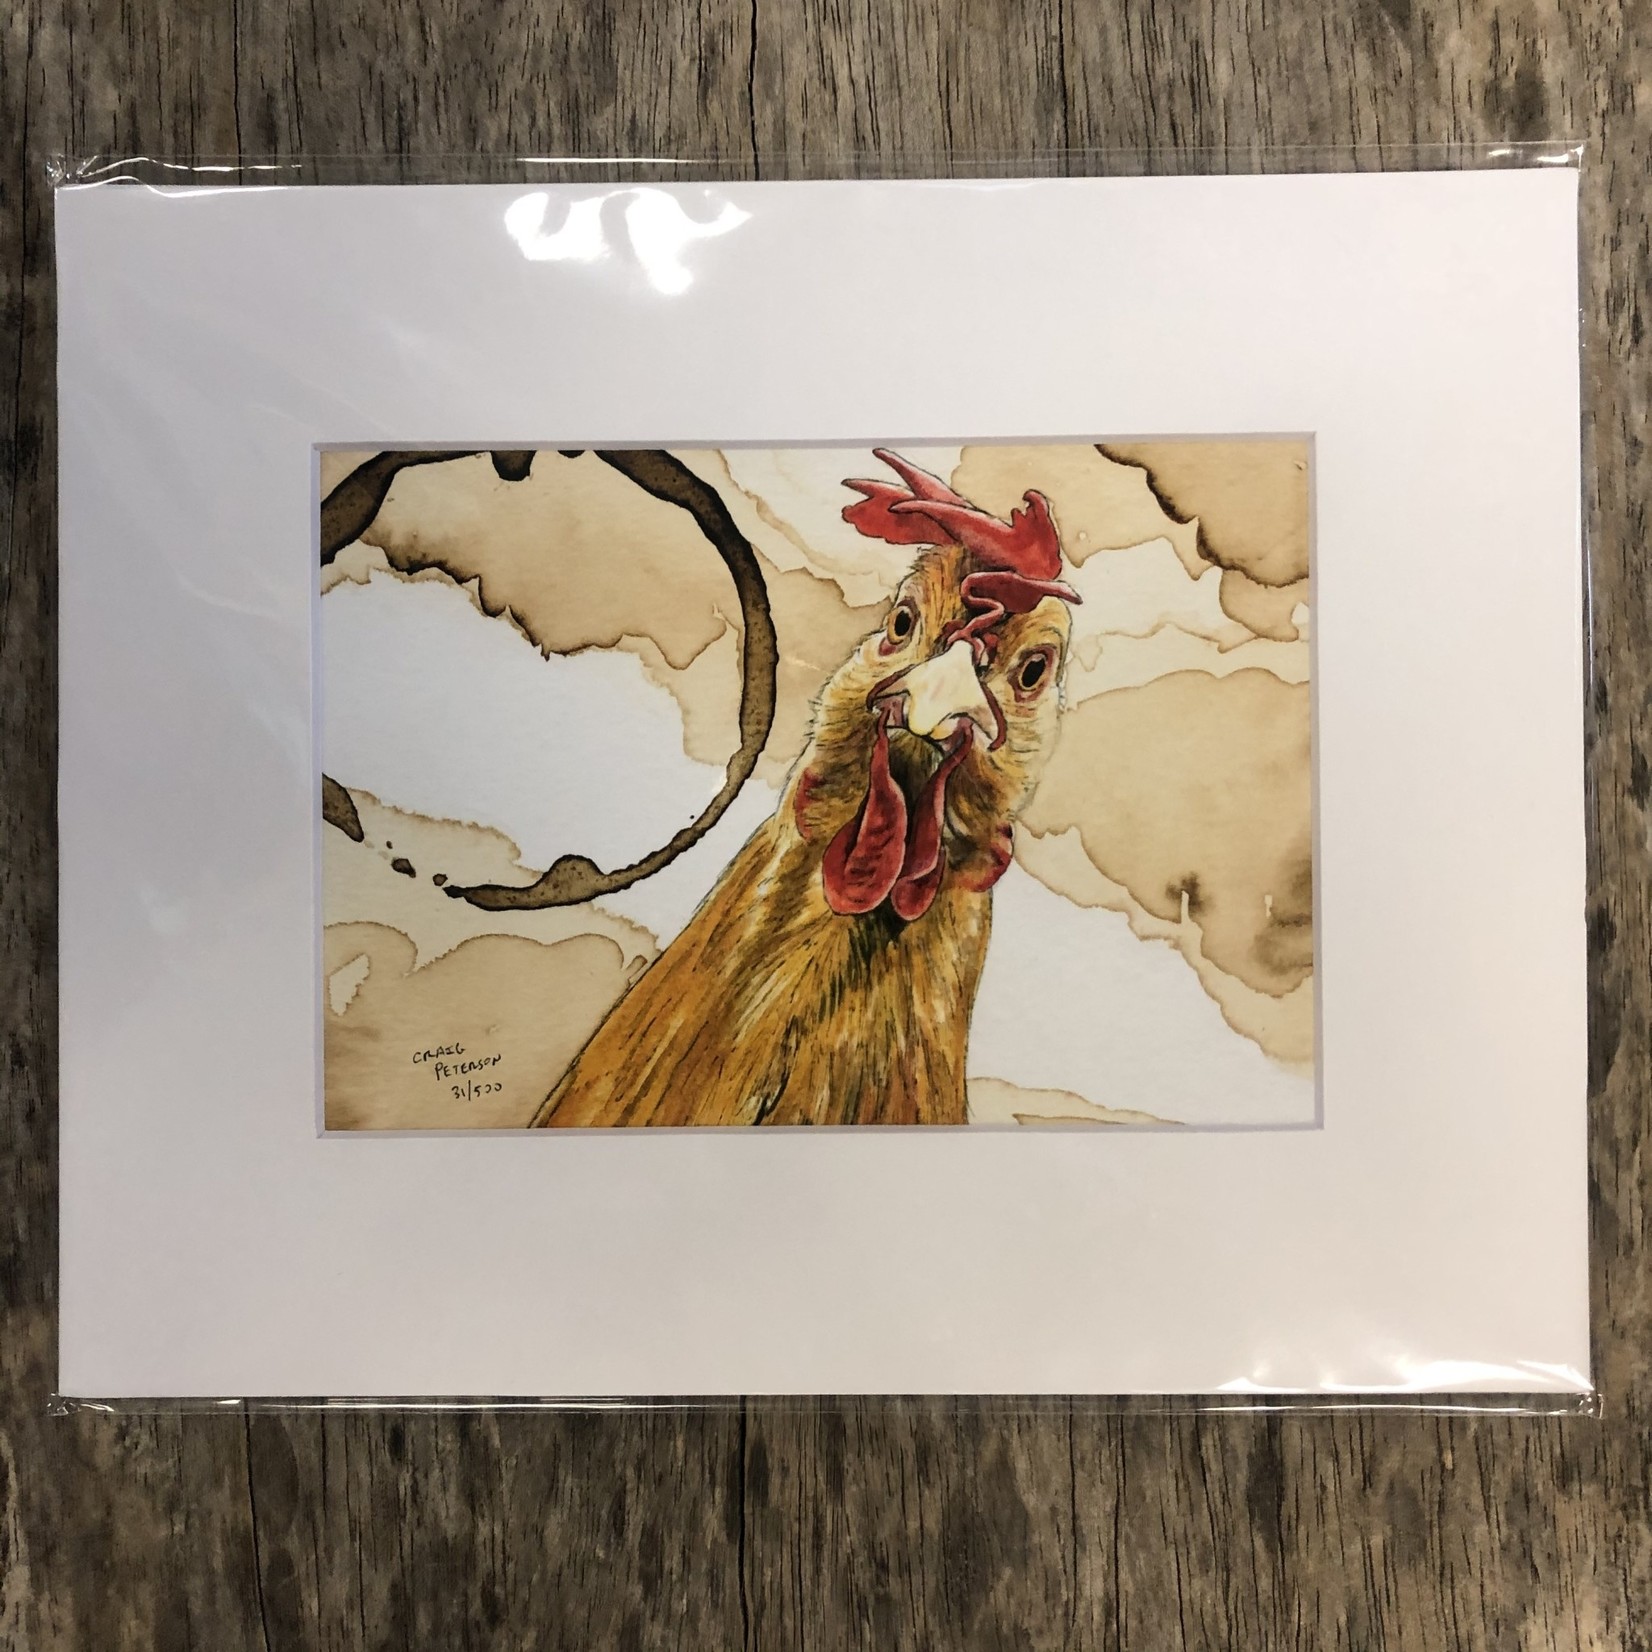 Craig Peterson Craig Peterson | Rooster Coffee stain watercolor